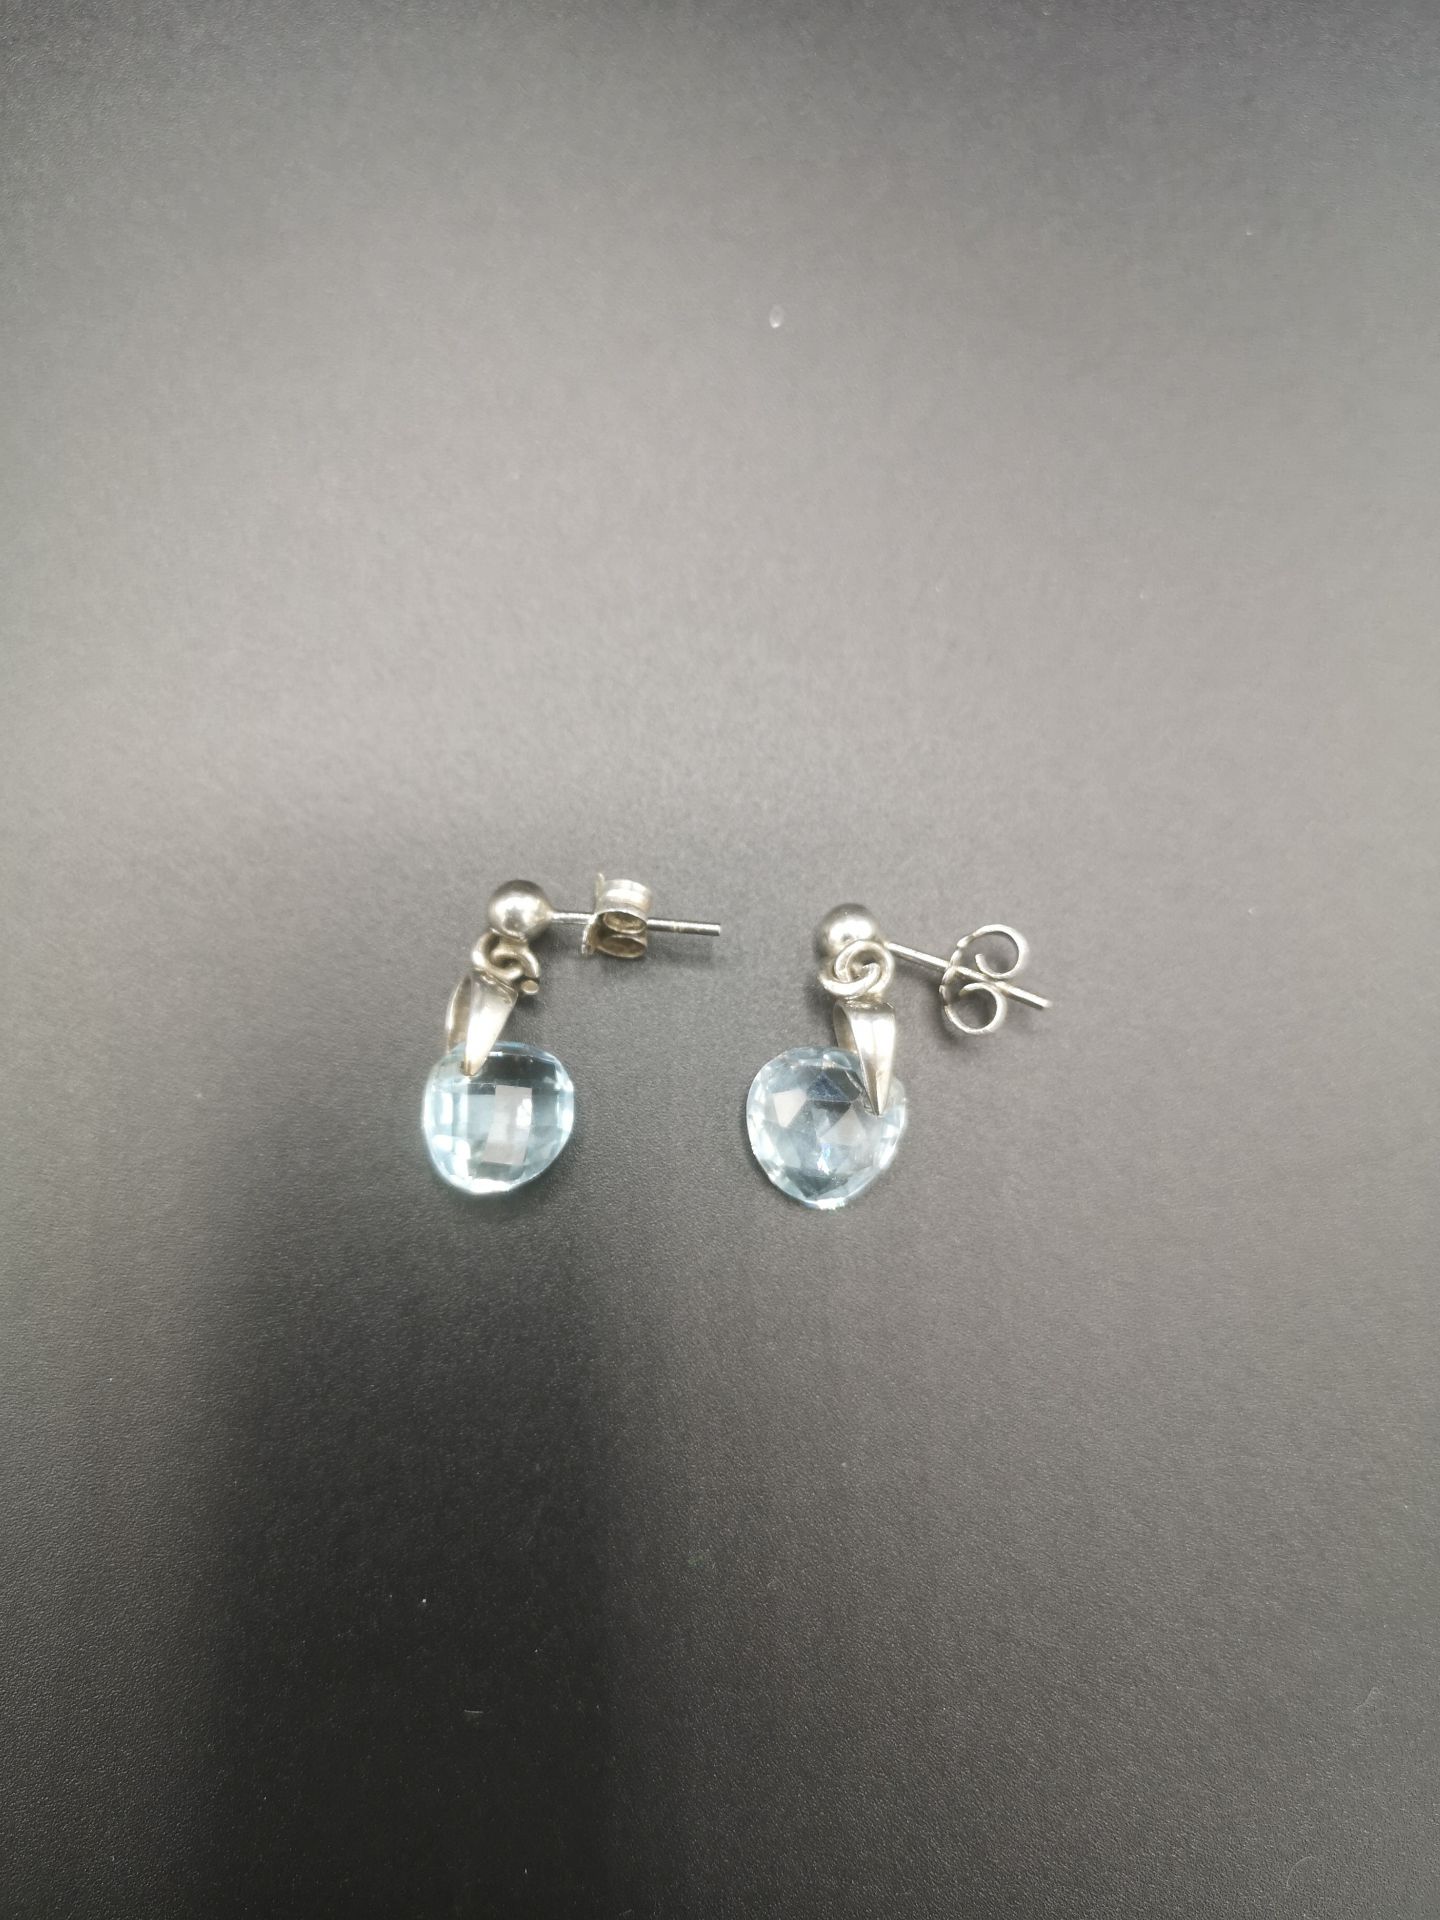 Pair of silver and topaz earrings - Image 4 of 4